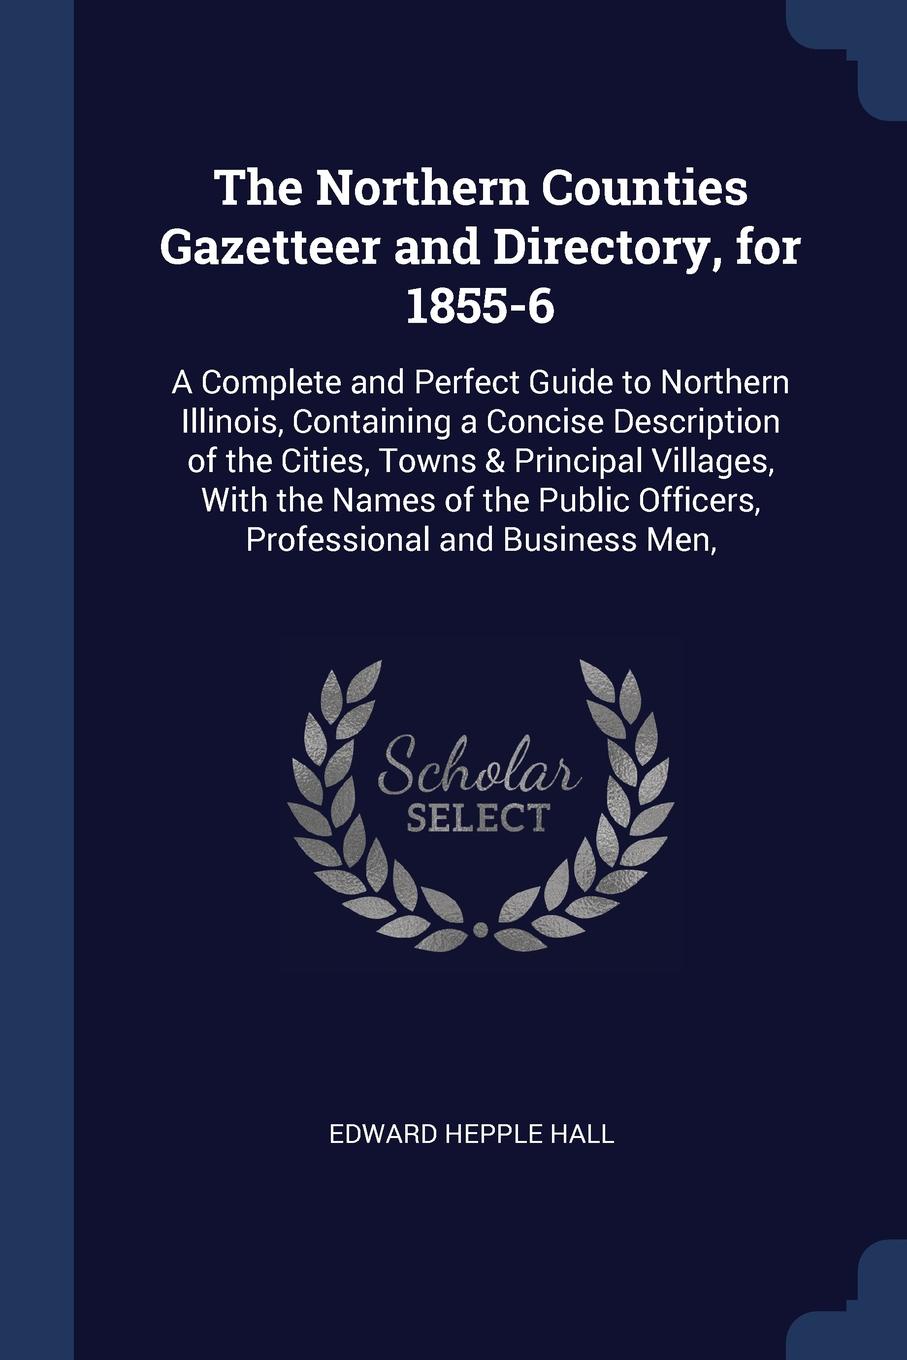 The Northern Counties Gazetteer and Directory, for 1855-6. A Complete and Perfect Guide to Northern Illinois, Containing a Concise Description of the Cities, Towns & Principal Villages, With the Names of the Public Officers, Professional and Busin...